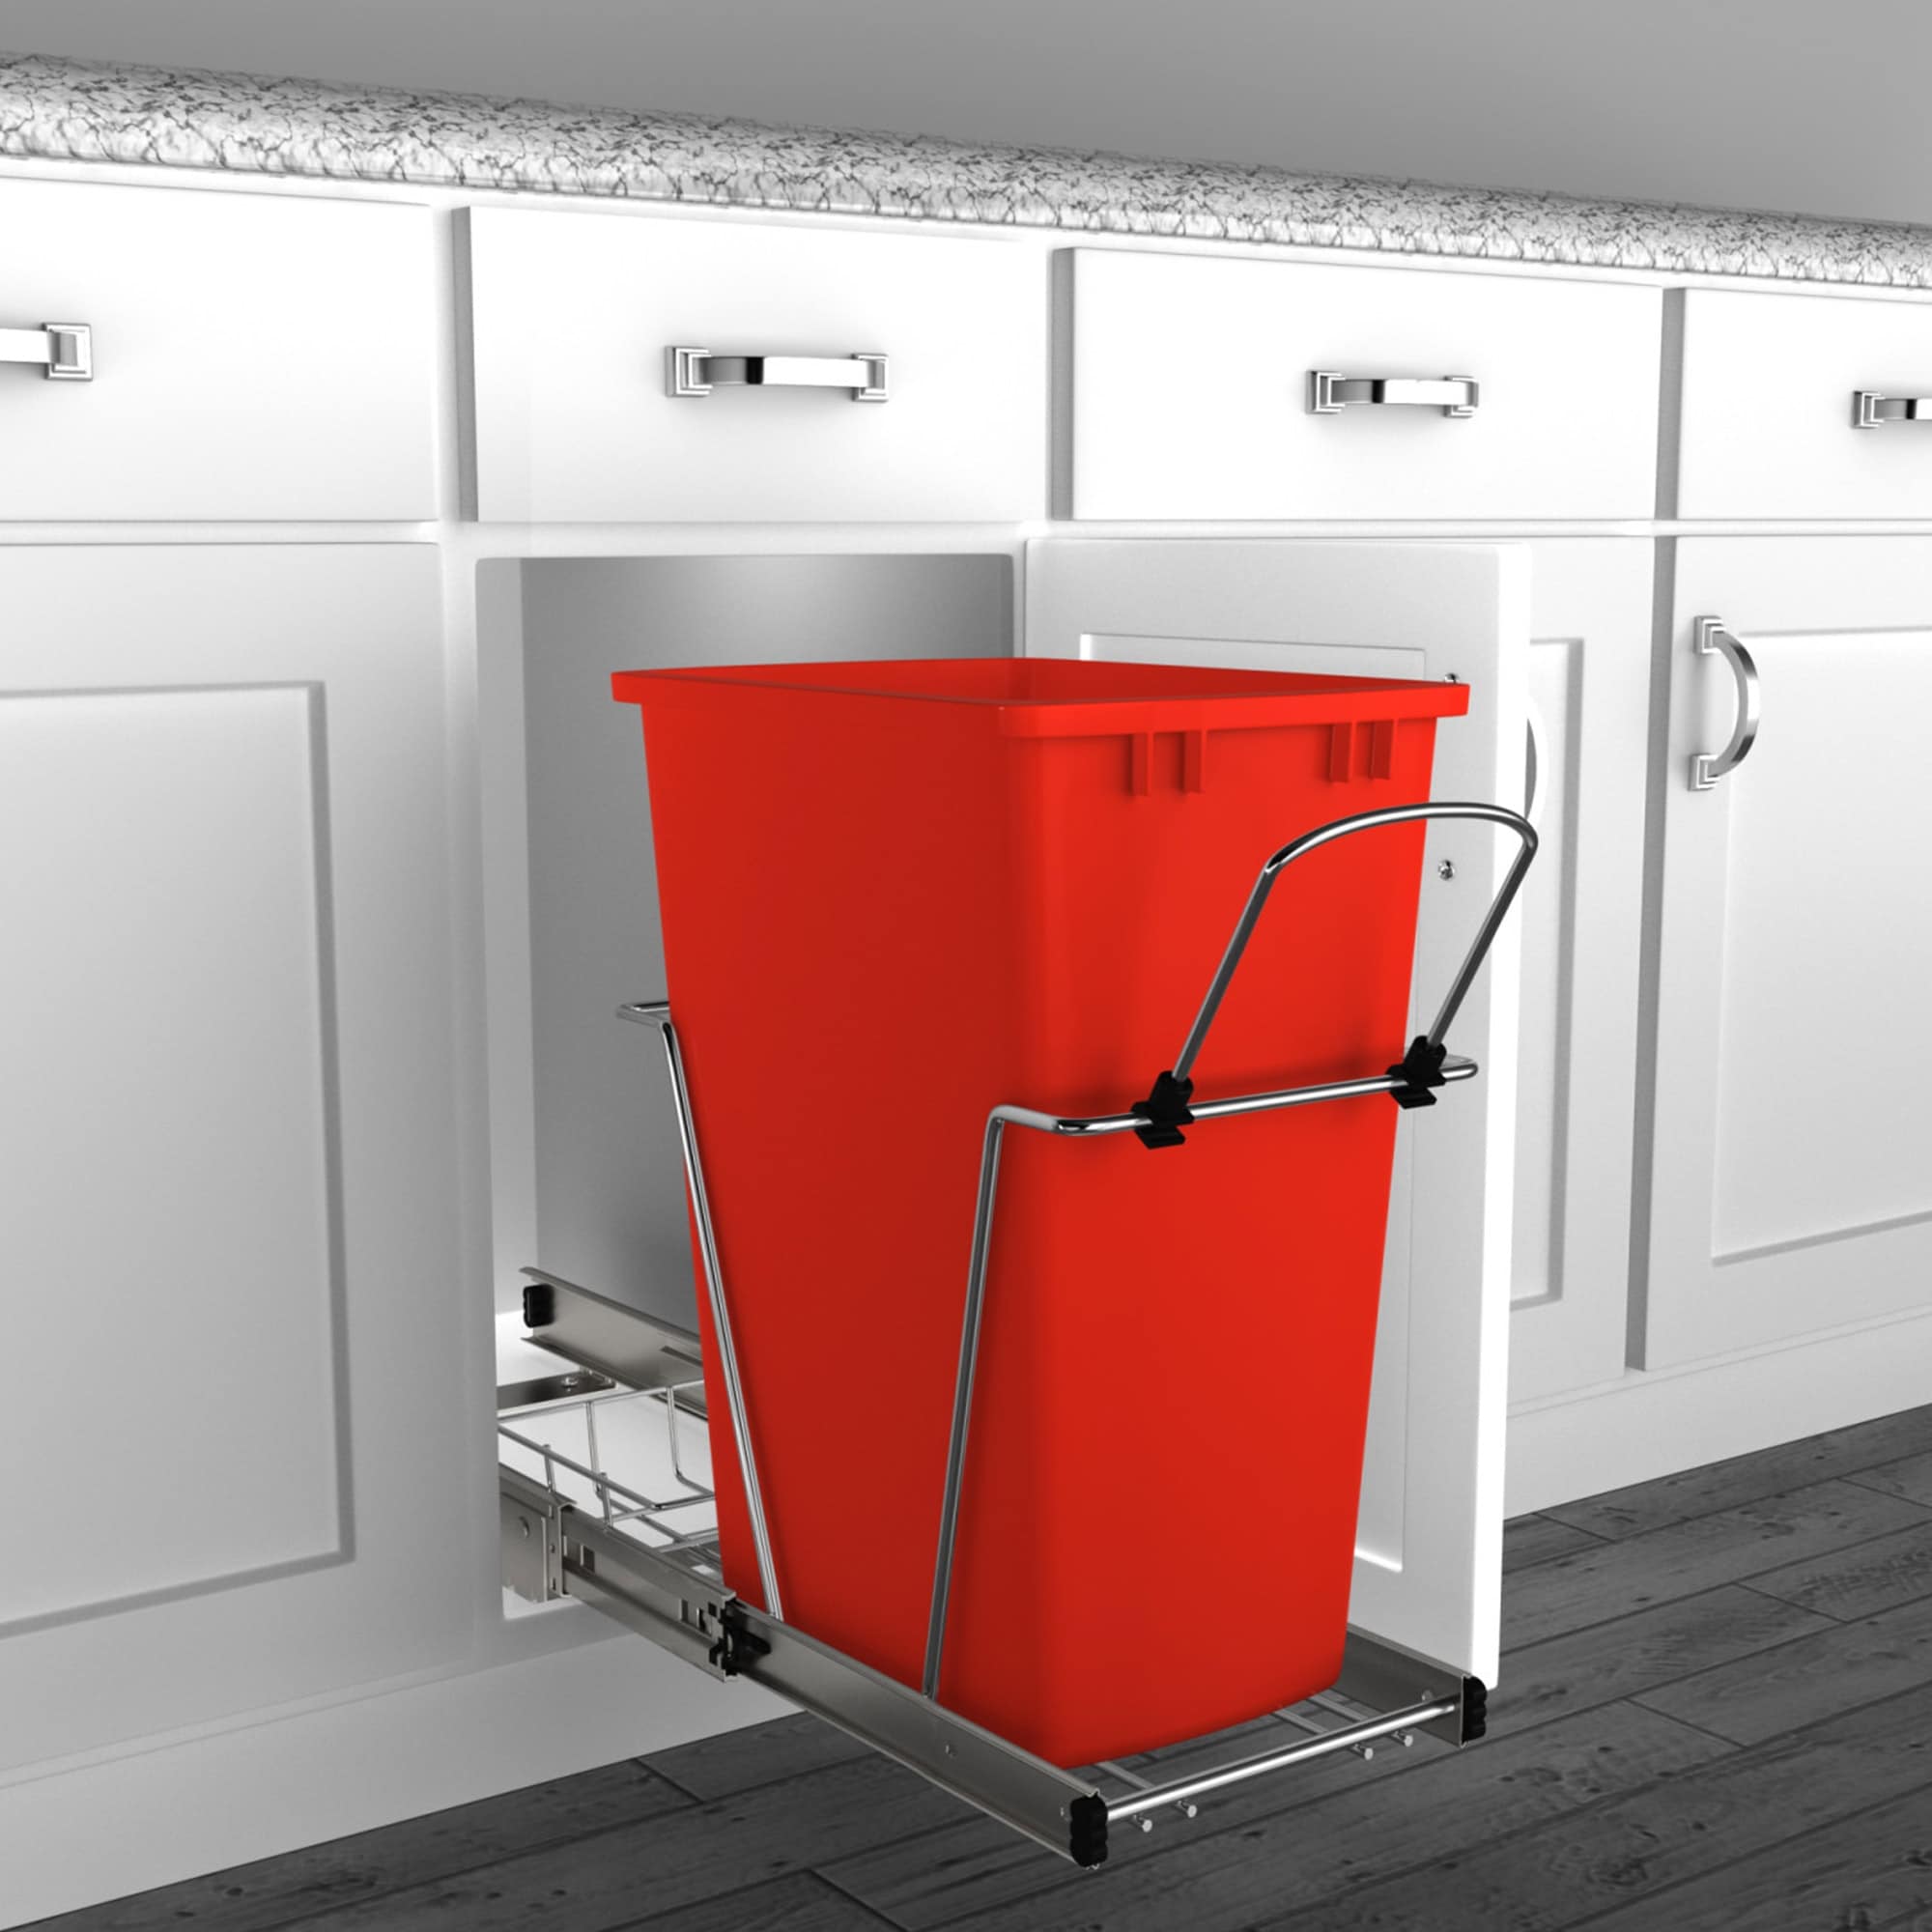 https://ak1.ostkcdn.com/images/products/is/images/direct/02092925f1268f8eadf0730ea64c1e89f4b95ef2/Rev-A-Shelf-Pull-Out-Trash-Can-35-Qt-for-Kitchen-Cabinets%2C-Silver%2C-RV-12KD-17C-S.jpg